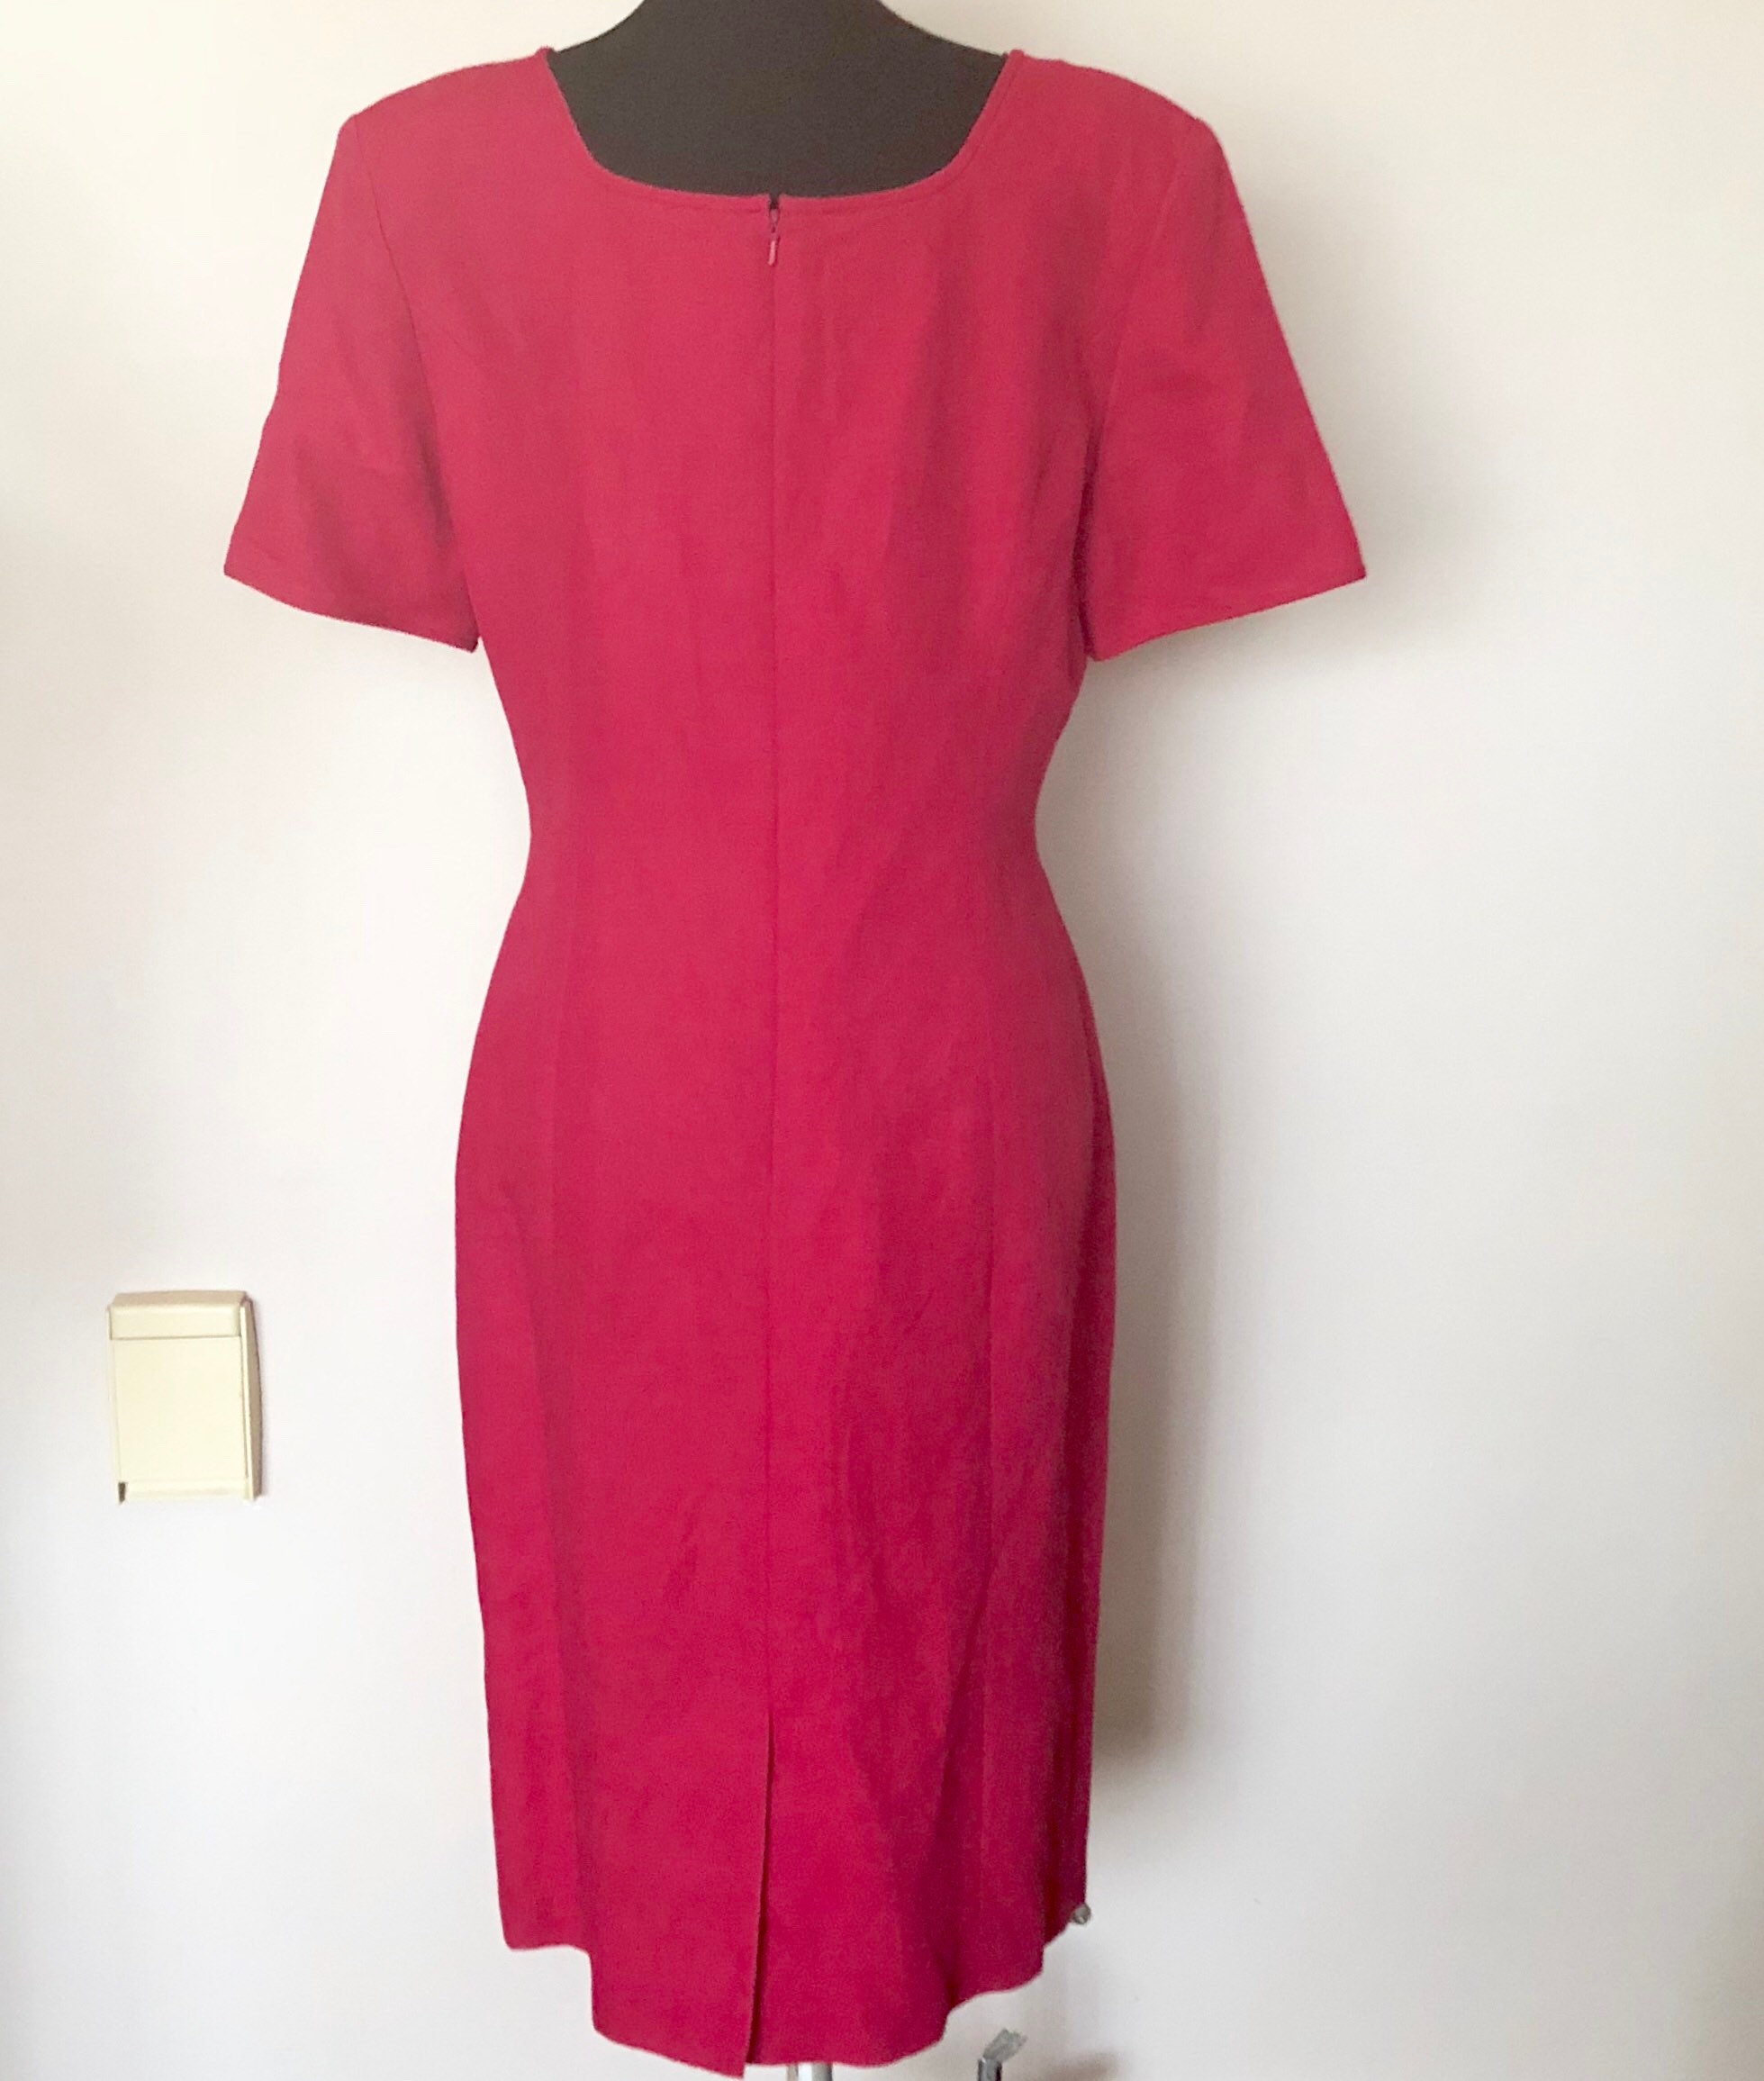 Vintage 1980s Brooks Brothers Deep Pink/red Linen/rayon Sheath - Etsy